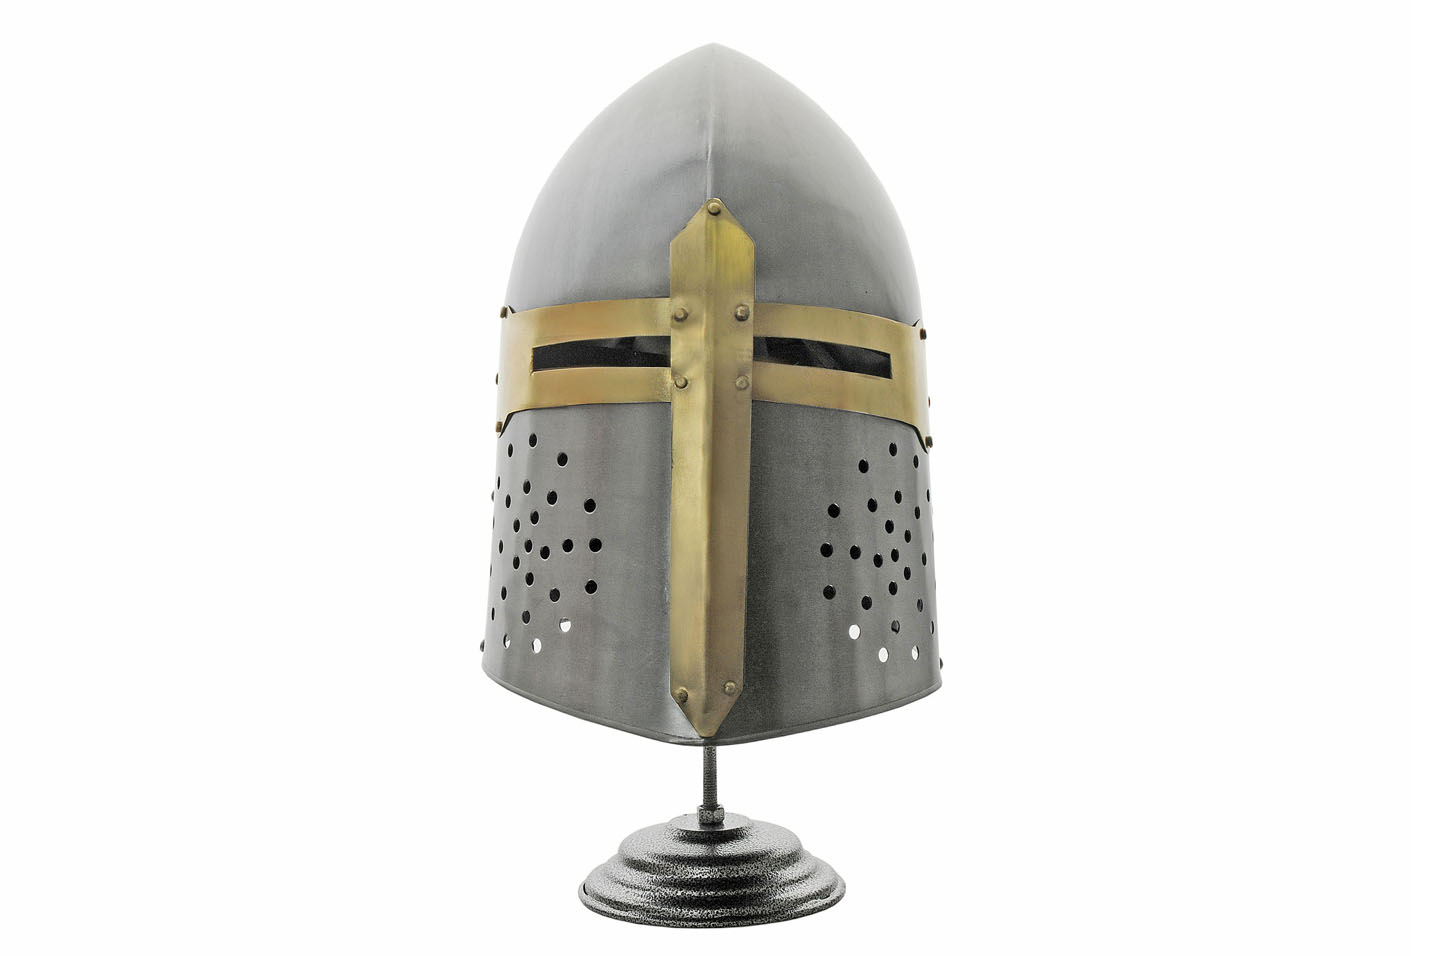 Details about   Armor Sugarloaf Armor Helmet Brass Accents Medieval Knight Crusader 